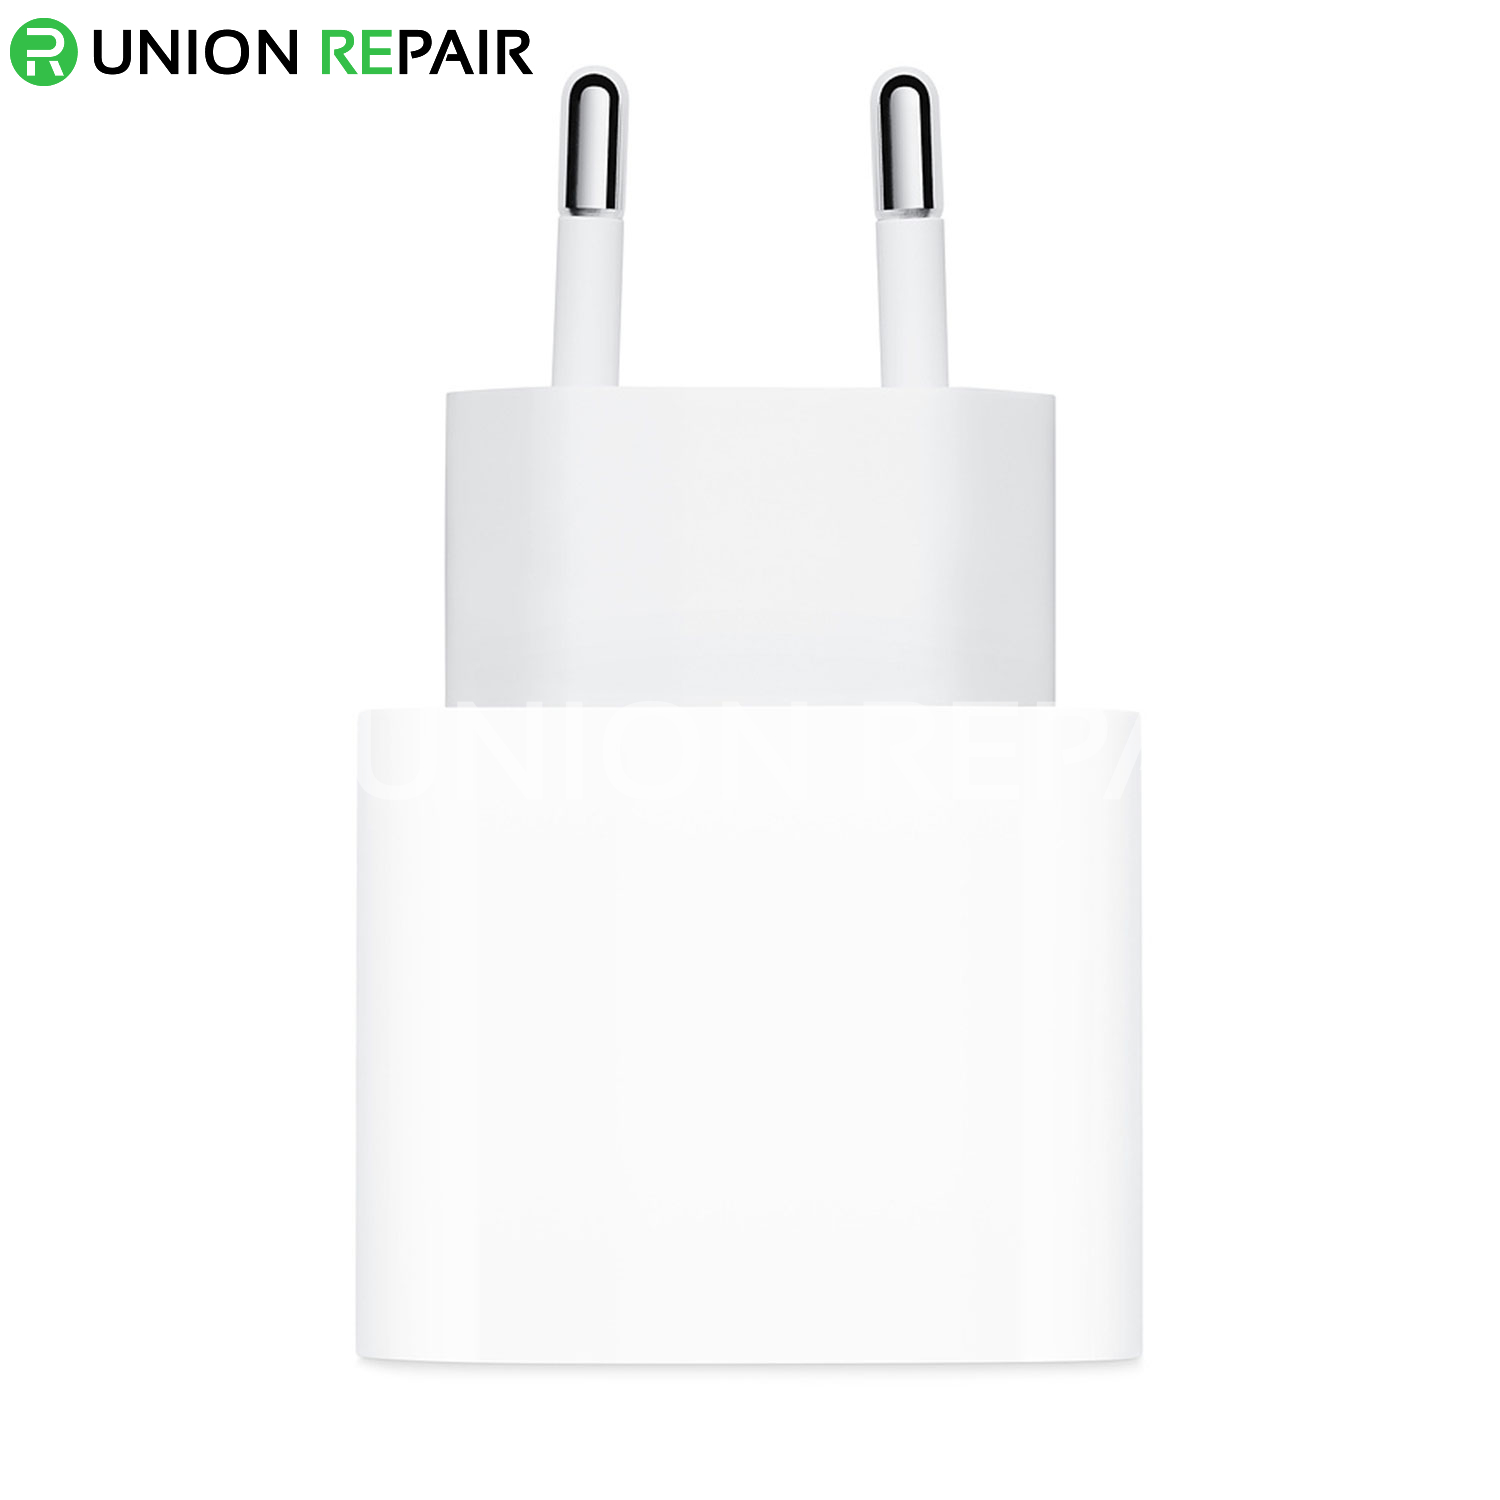  20W USB-C Power Adapter for iPhone - EU Version, fig. 2 